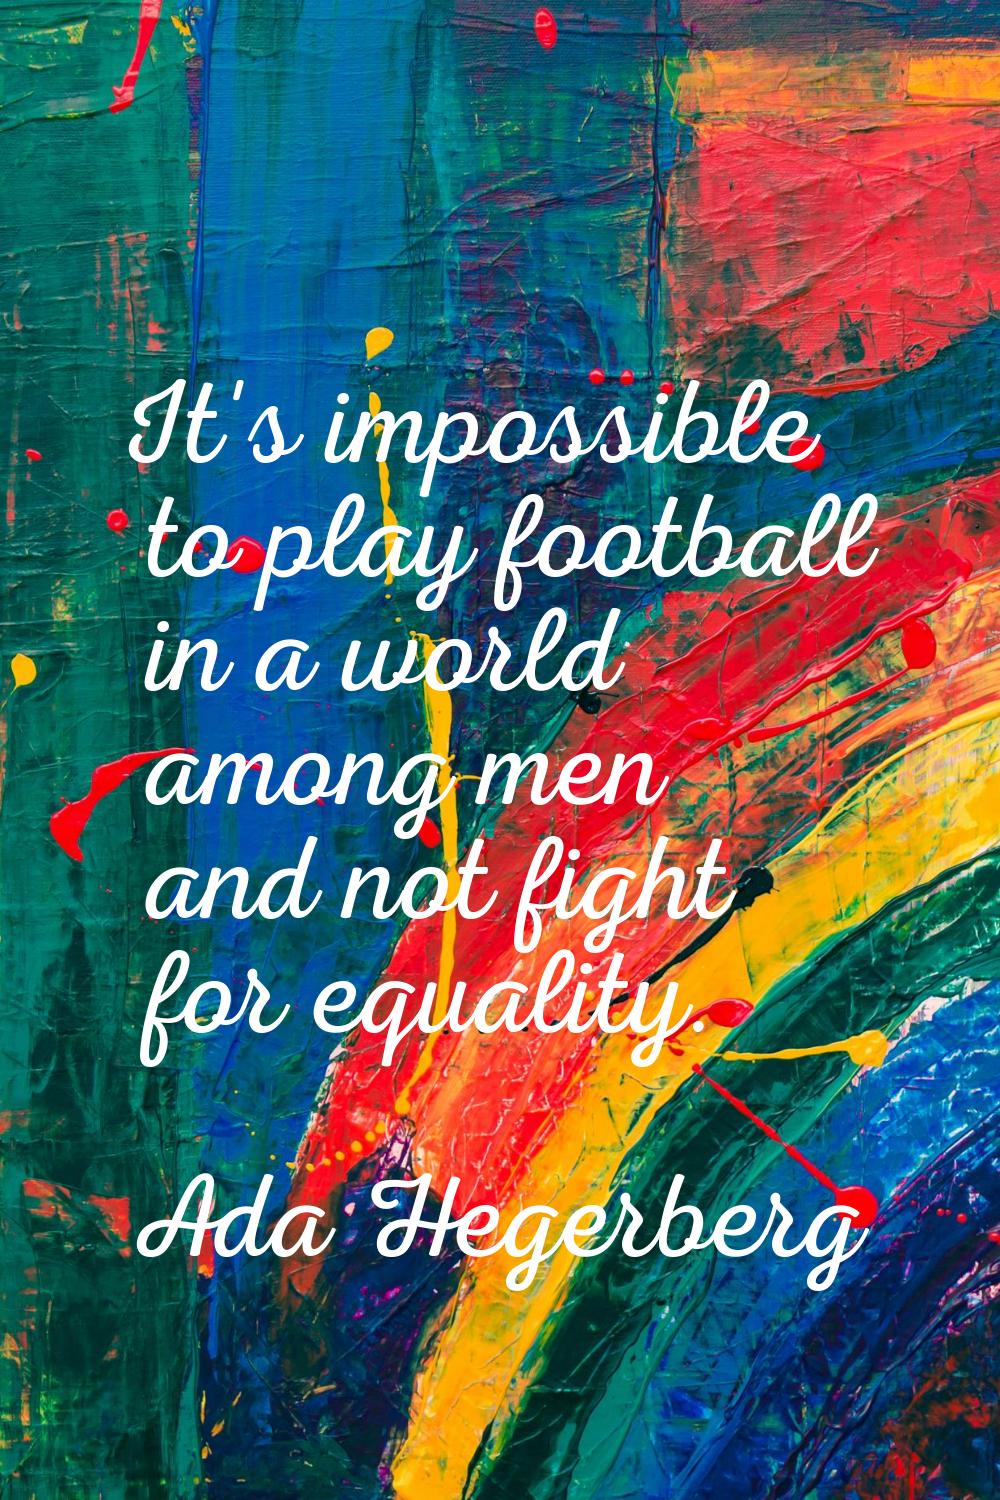 It's impossible to play football in a world among men and not fight for equality.